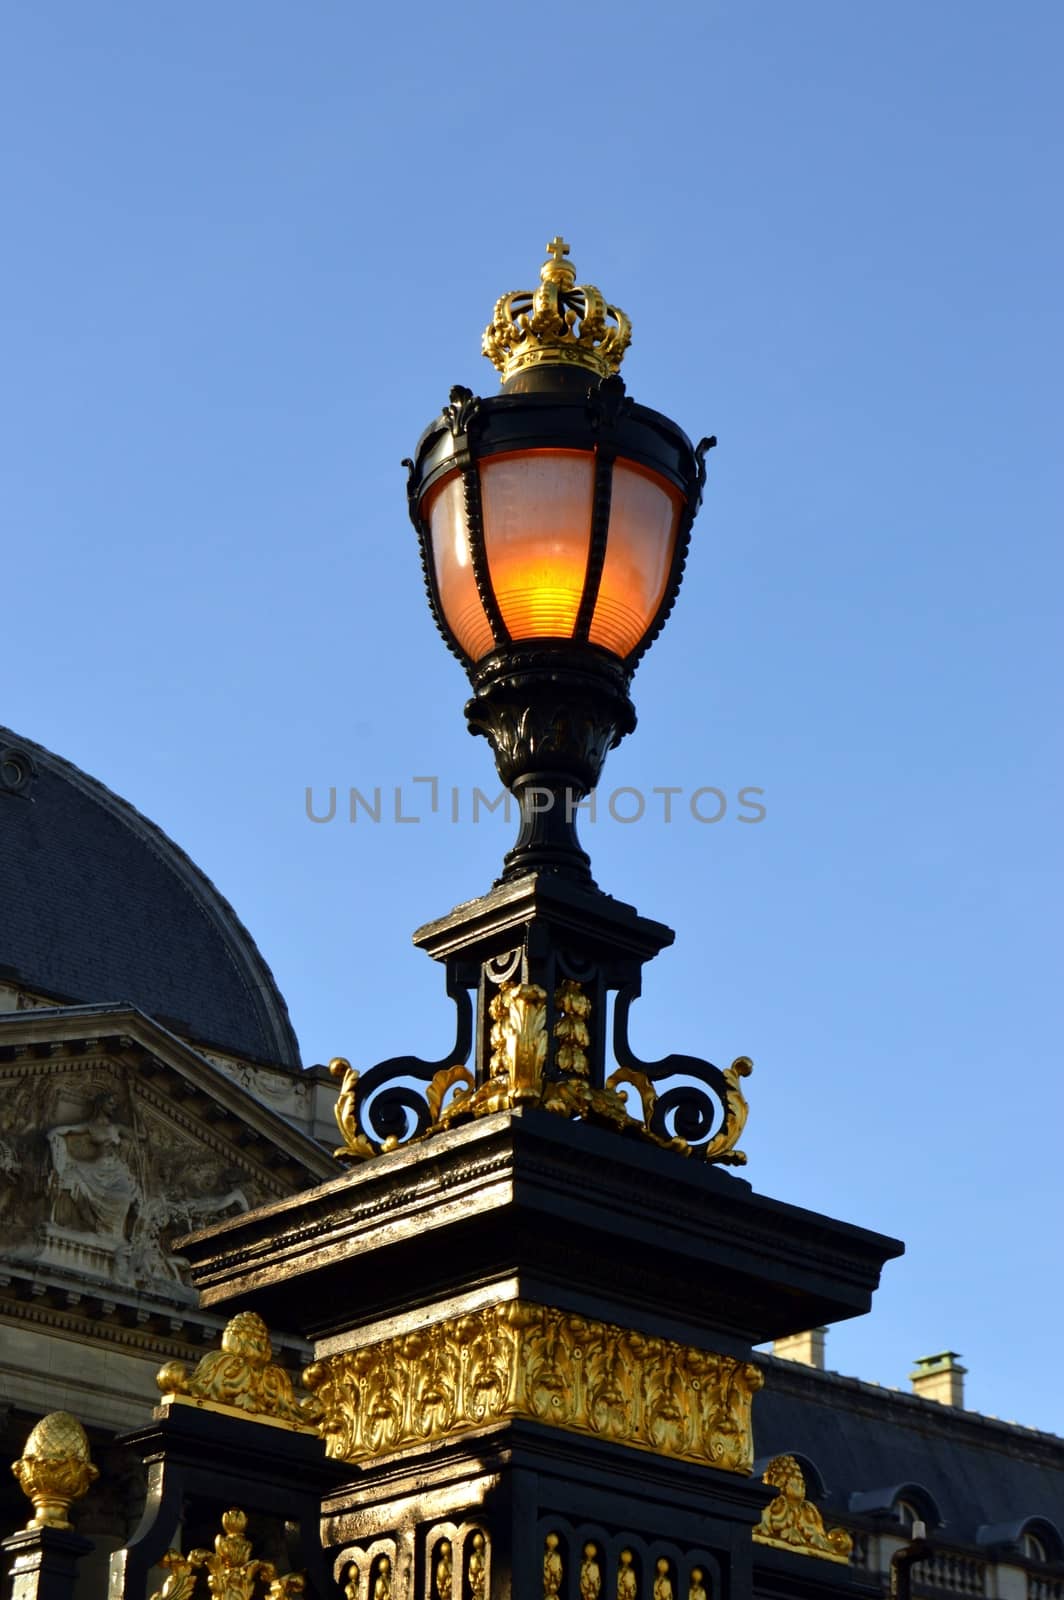 Royal lantern with a crown and gold gilding placed on a column